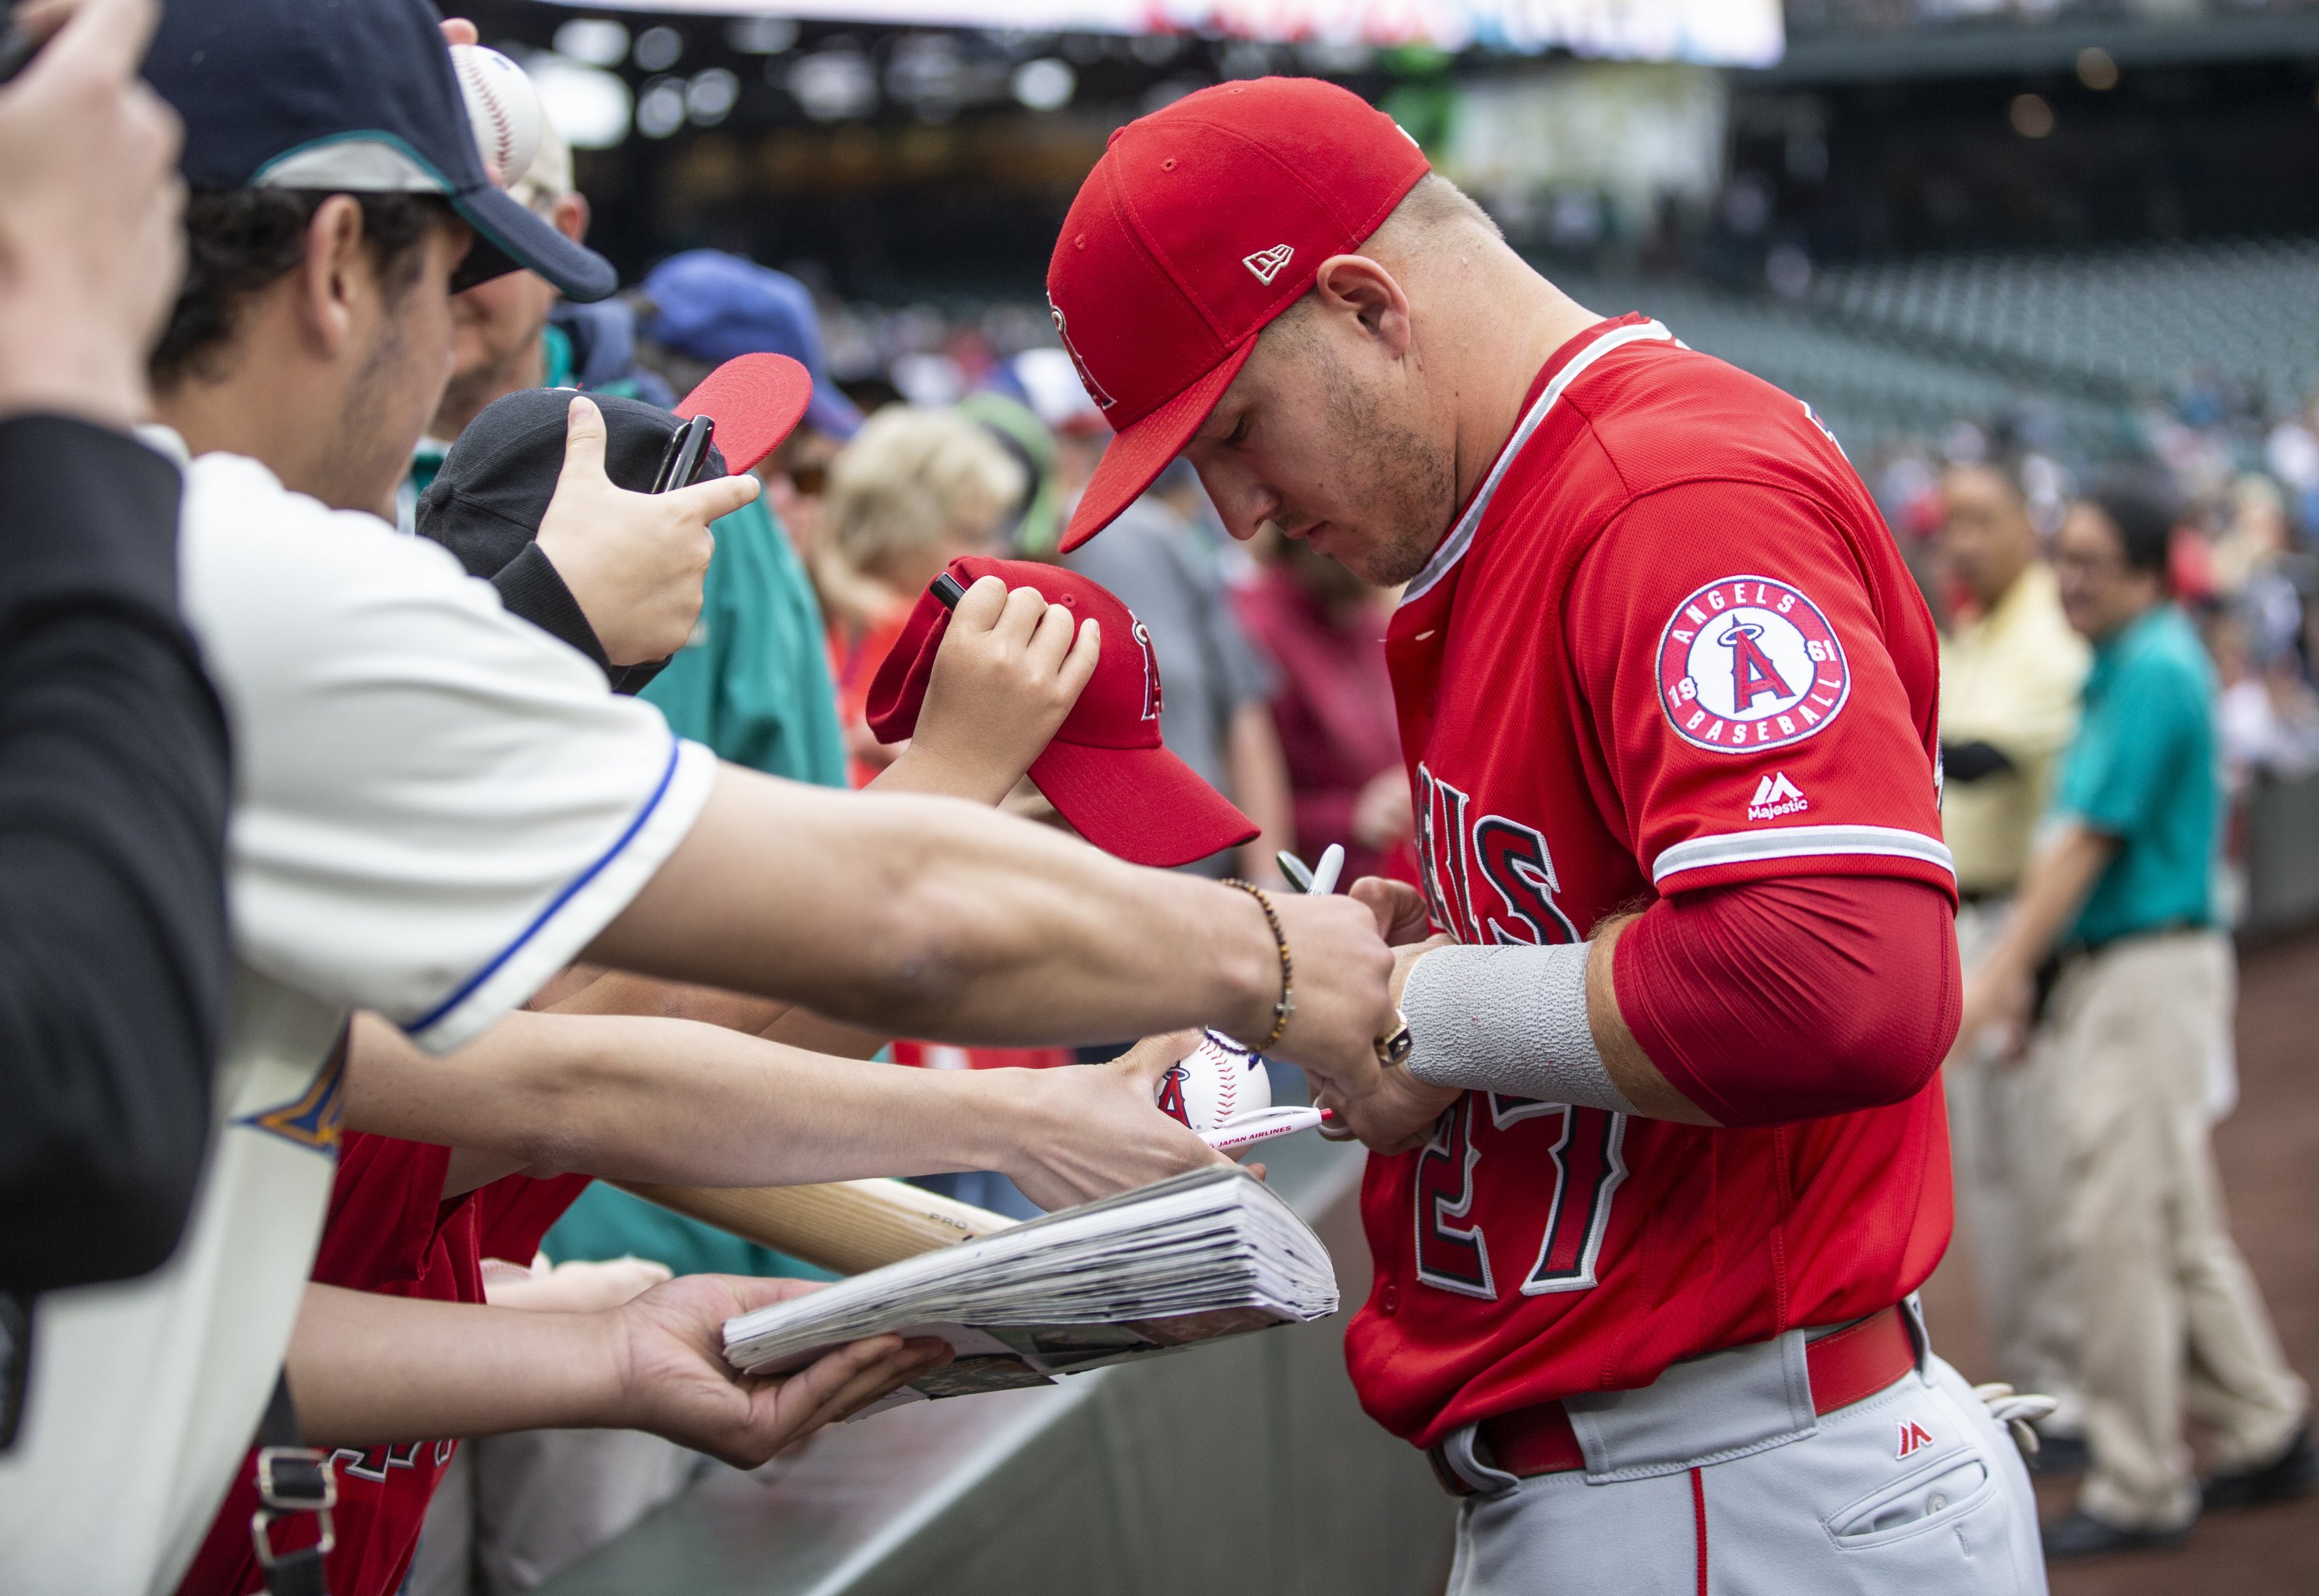 Mike Trout: MLB commissioner says star must 'make decision to engage